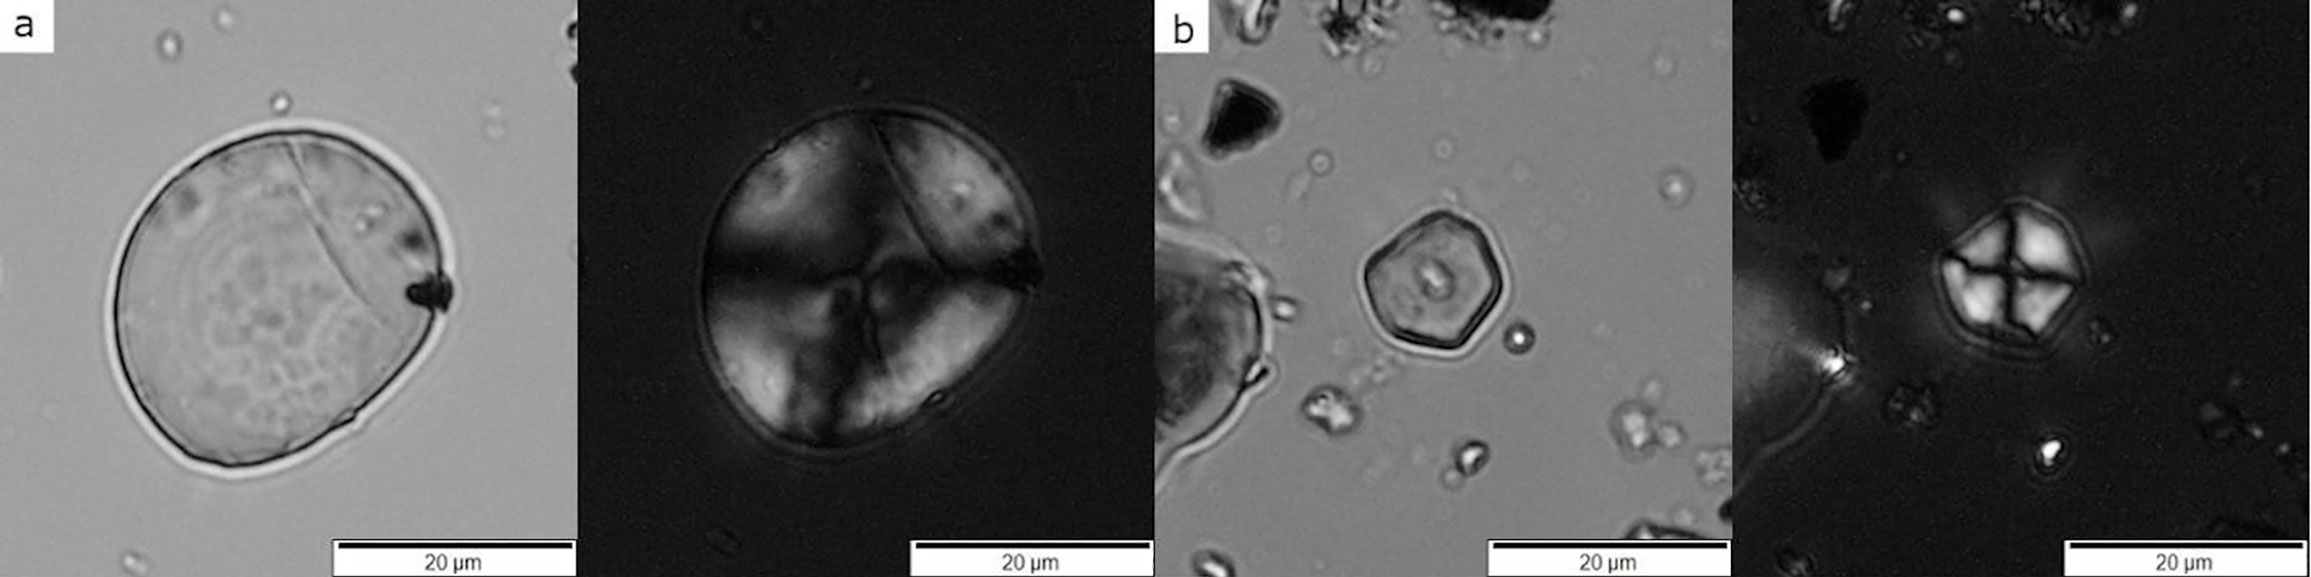 Four-panel image showing photomicrographs of ancient starch grains recovered from grinding tools at the Neolithic archaeological site Çatalhöyük in Turkey, dating between about 6700 and 6300 years B.C. Each pair of images shows the grains under brightfield illumination (regular transmitted light) and cross-polarized light (showing the extinction cross). Left panels show starch from a member of the Wheatgrass Tribe (Tribe Triticeae), right panels show starch from a member of the Millet Tribe (Tribe Paniceae).